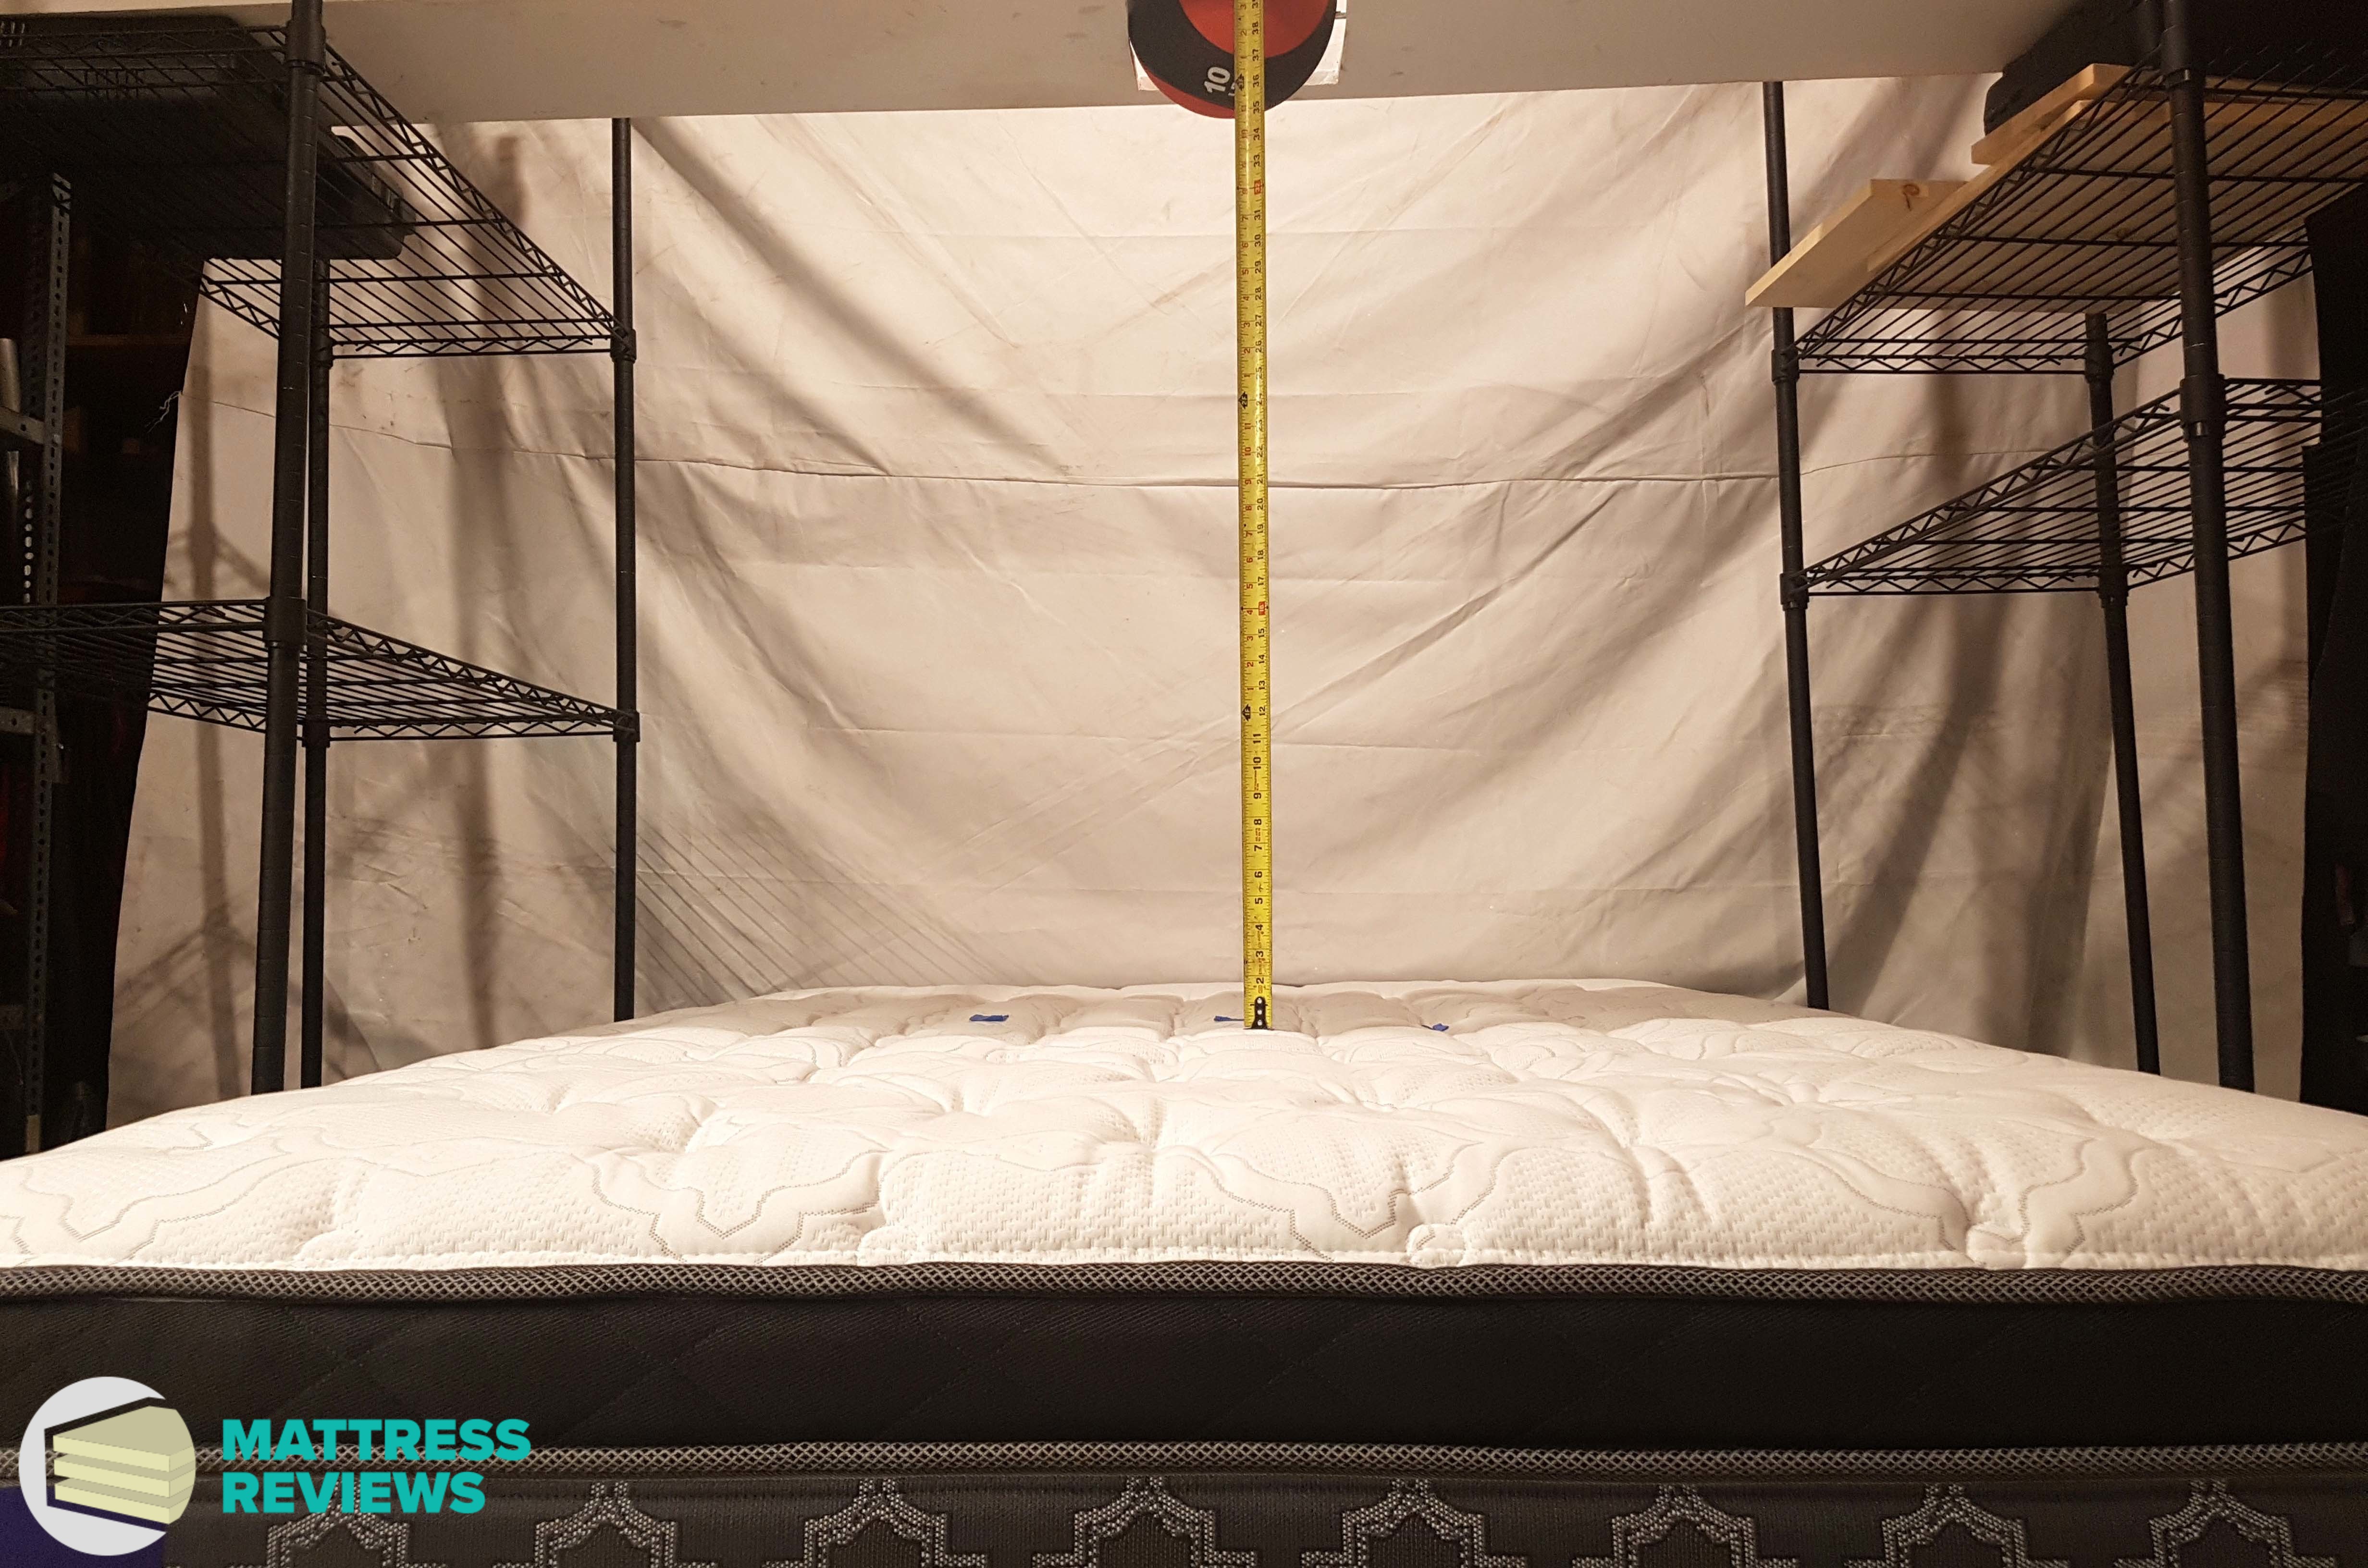 Image of the Sealy Posturepedic mattress bounce test.